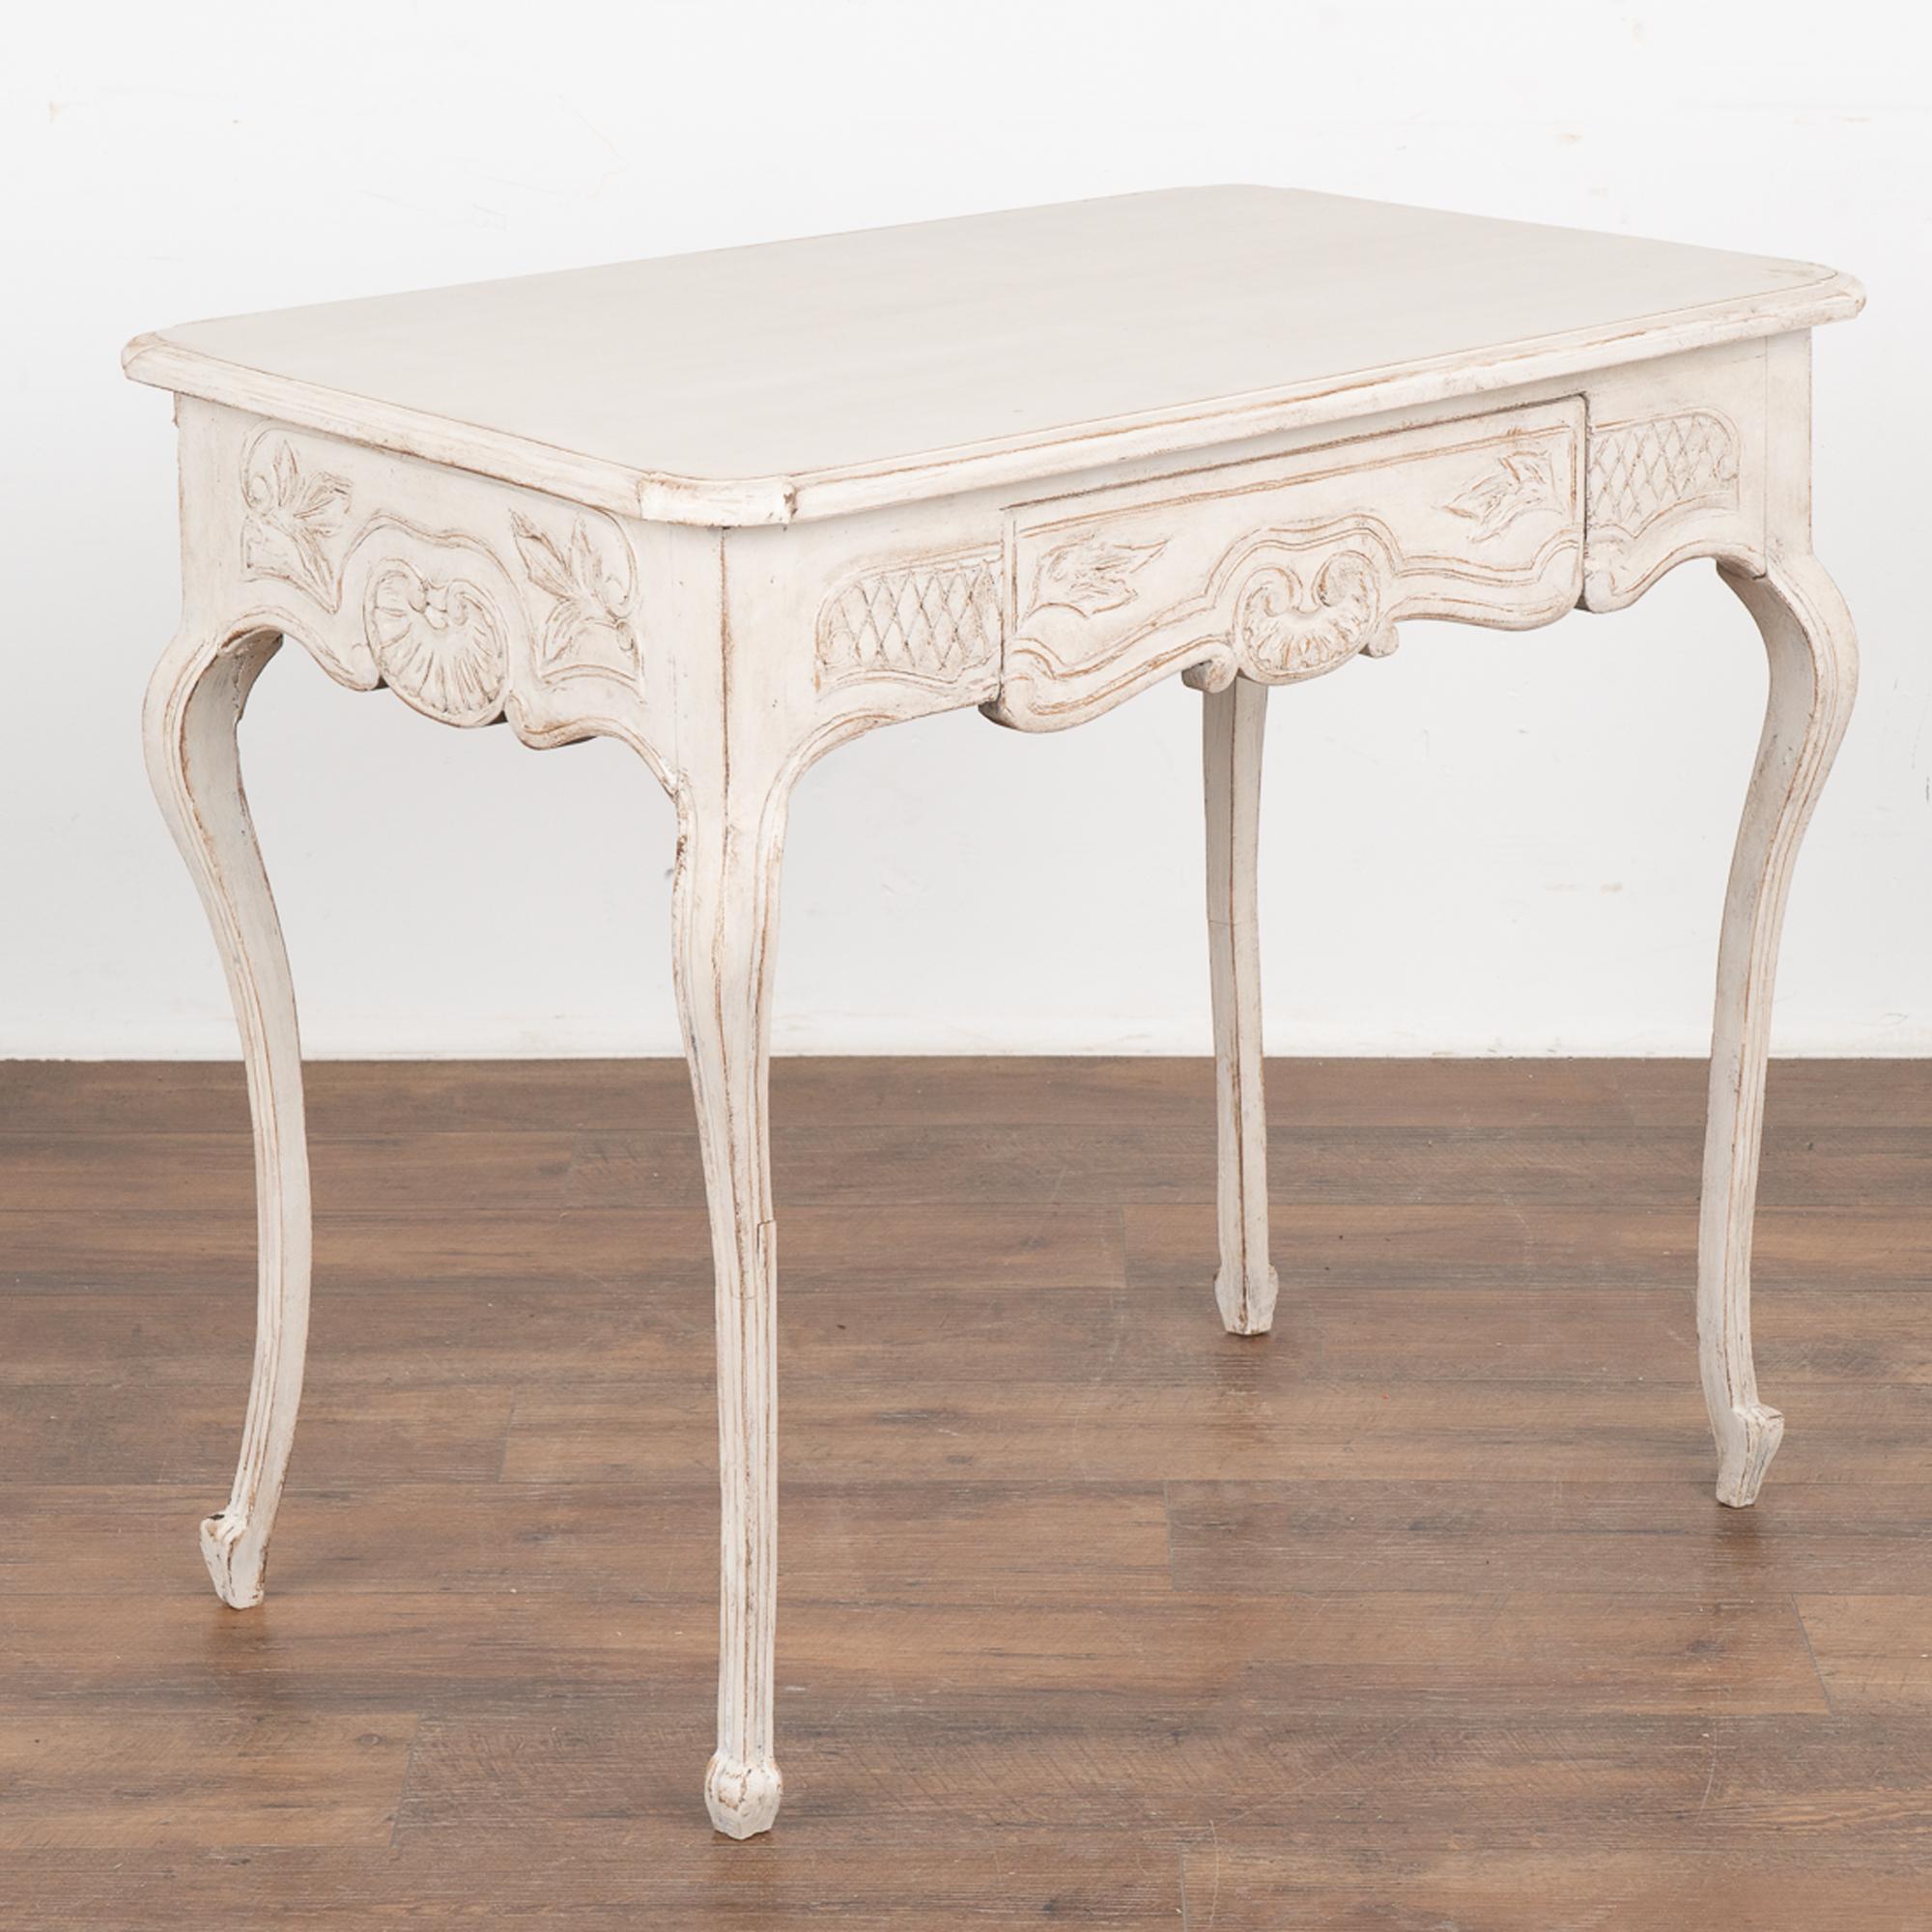 The delicate curved cabriolet legs and decorative carved skirt add a romantic touch to this charming Gustavian side table with single drawer.
The newer, professionally applied layered white painted finish has been lightly distressed to fit the age